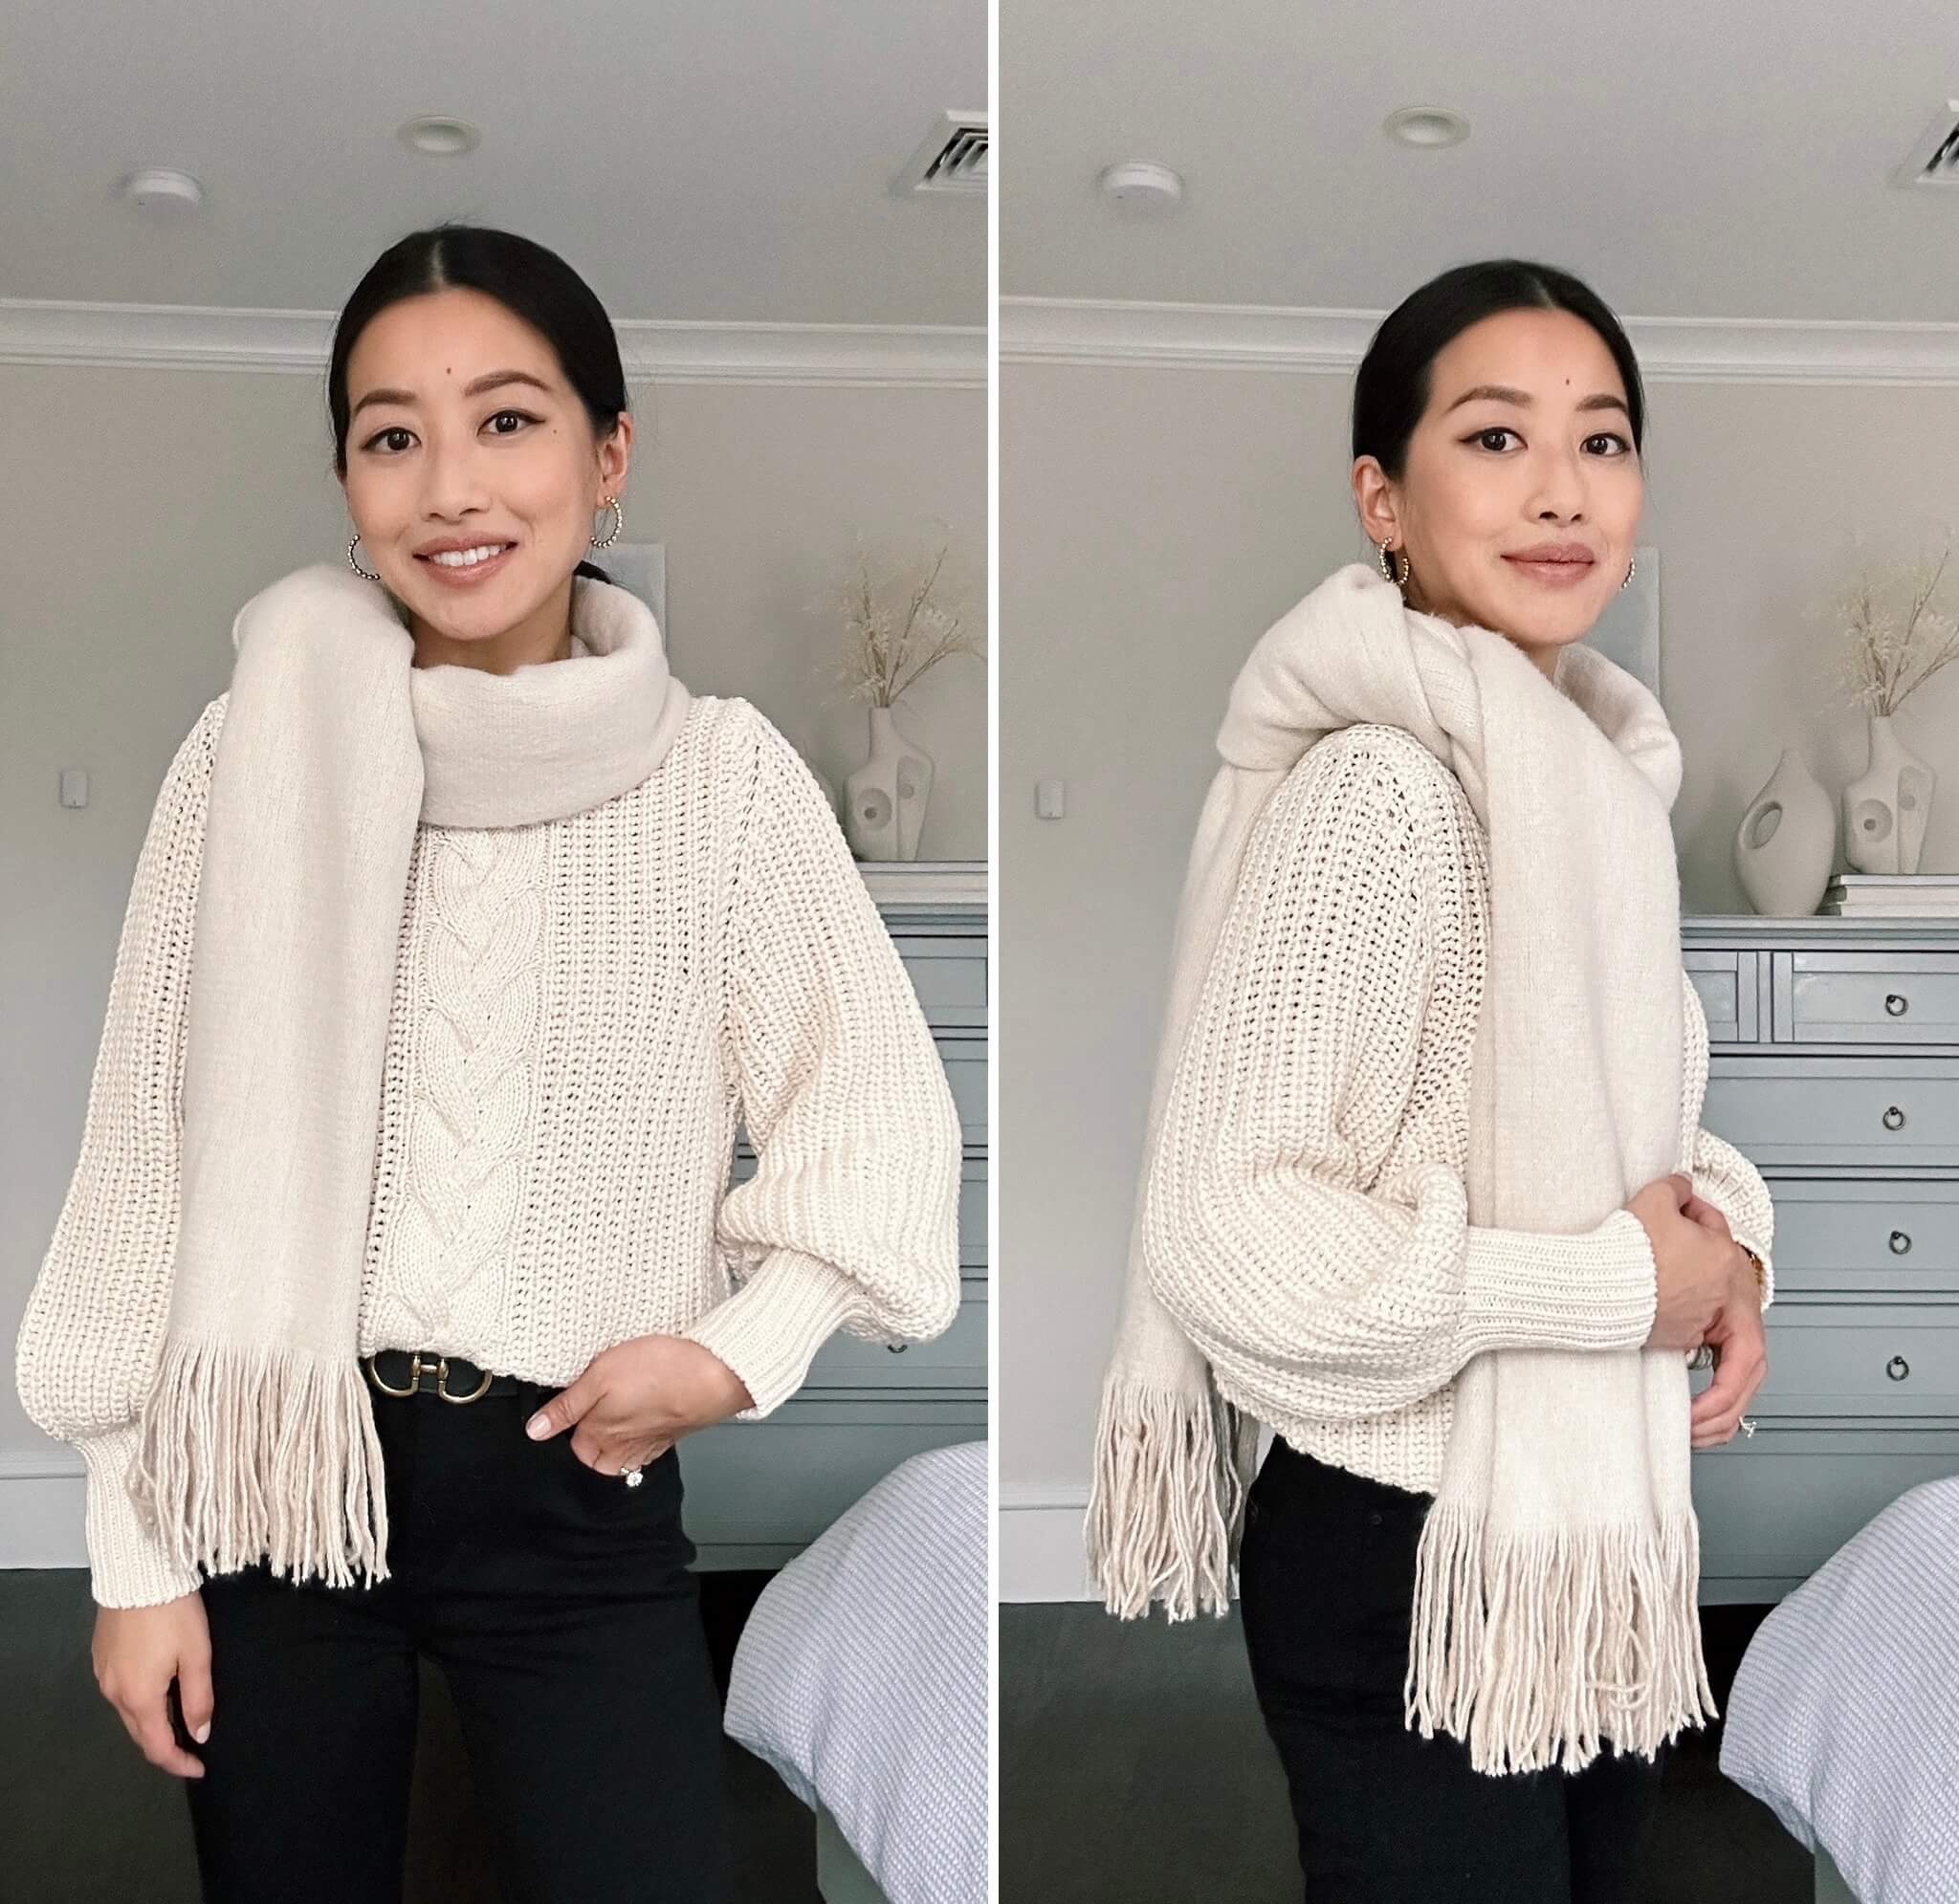 How to style a scarf so it stays put secured